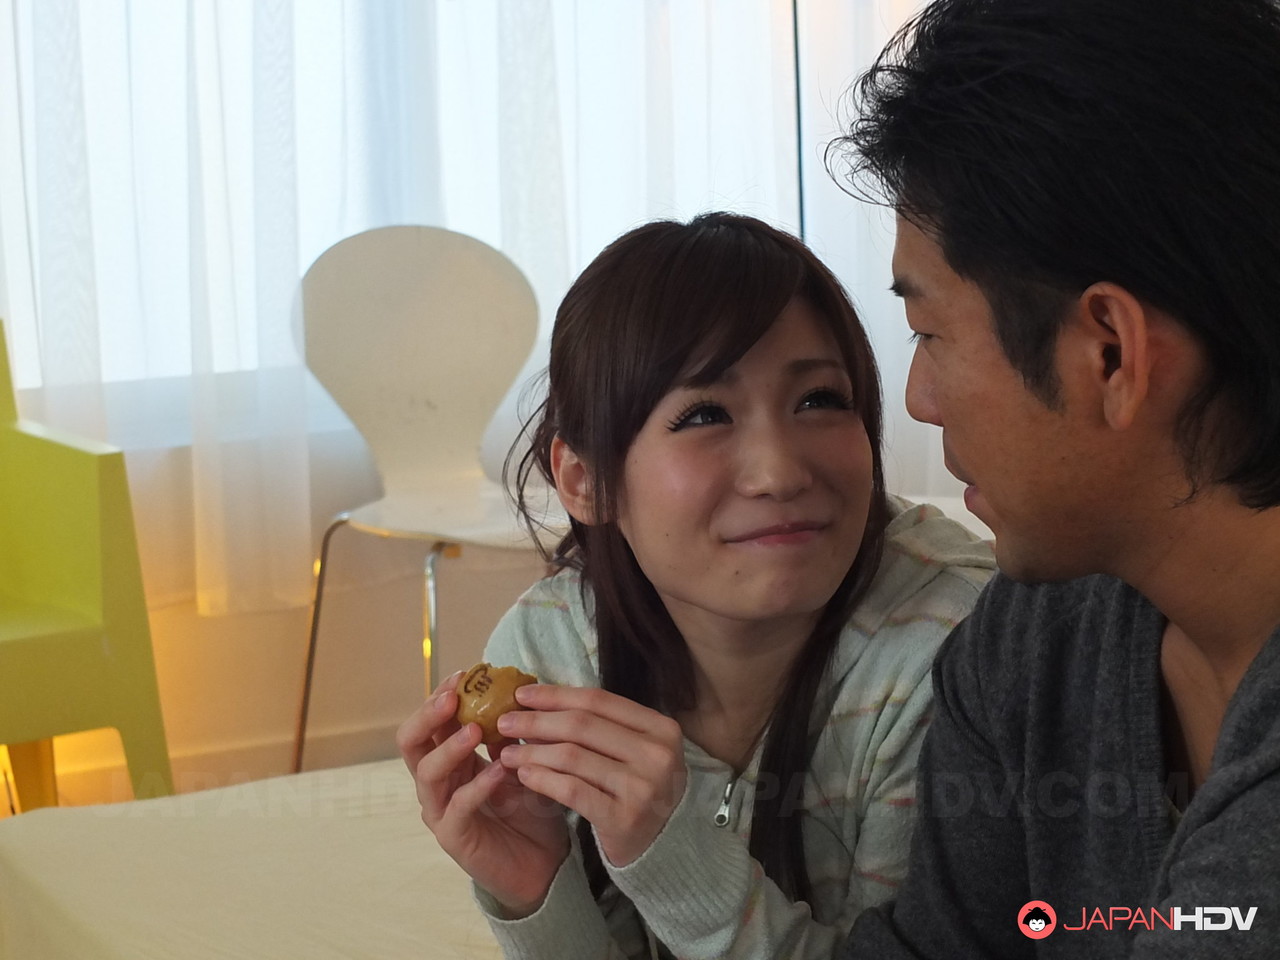 Asian nymphos with hot bodies Koi Miyamura and Tsukushi toy each other's clam foto porno #427162243 | Japan HDV Pics, Koi Miyamura, Tsukushi, Japanese, porno mobile